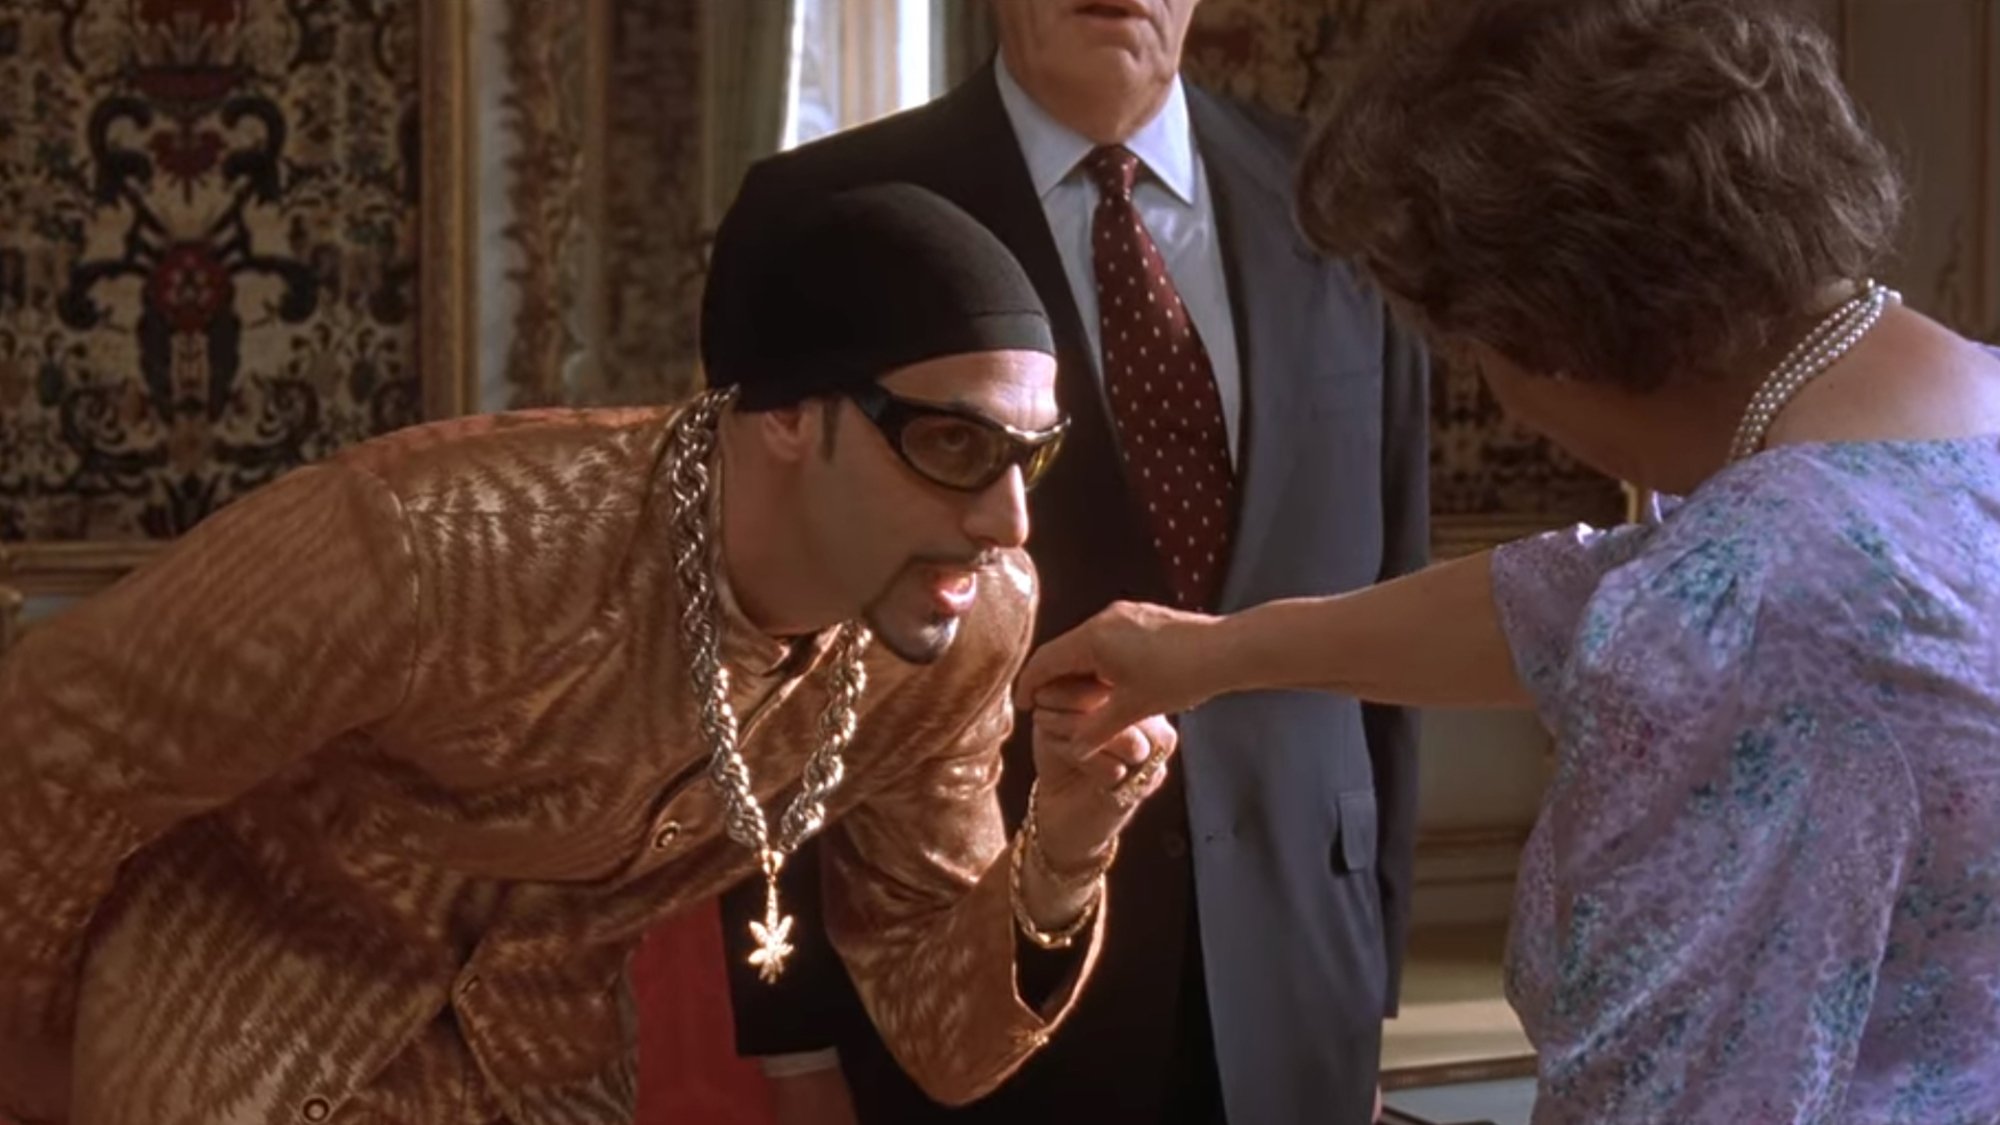 The character Ali G holds an actor's hand who looks like the Queen.